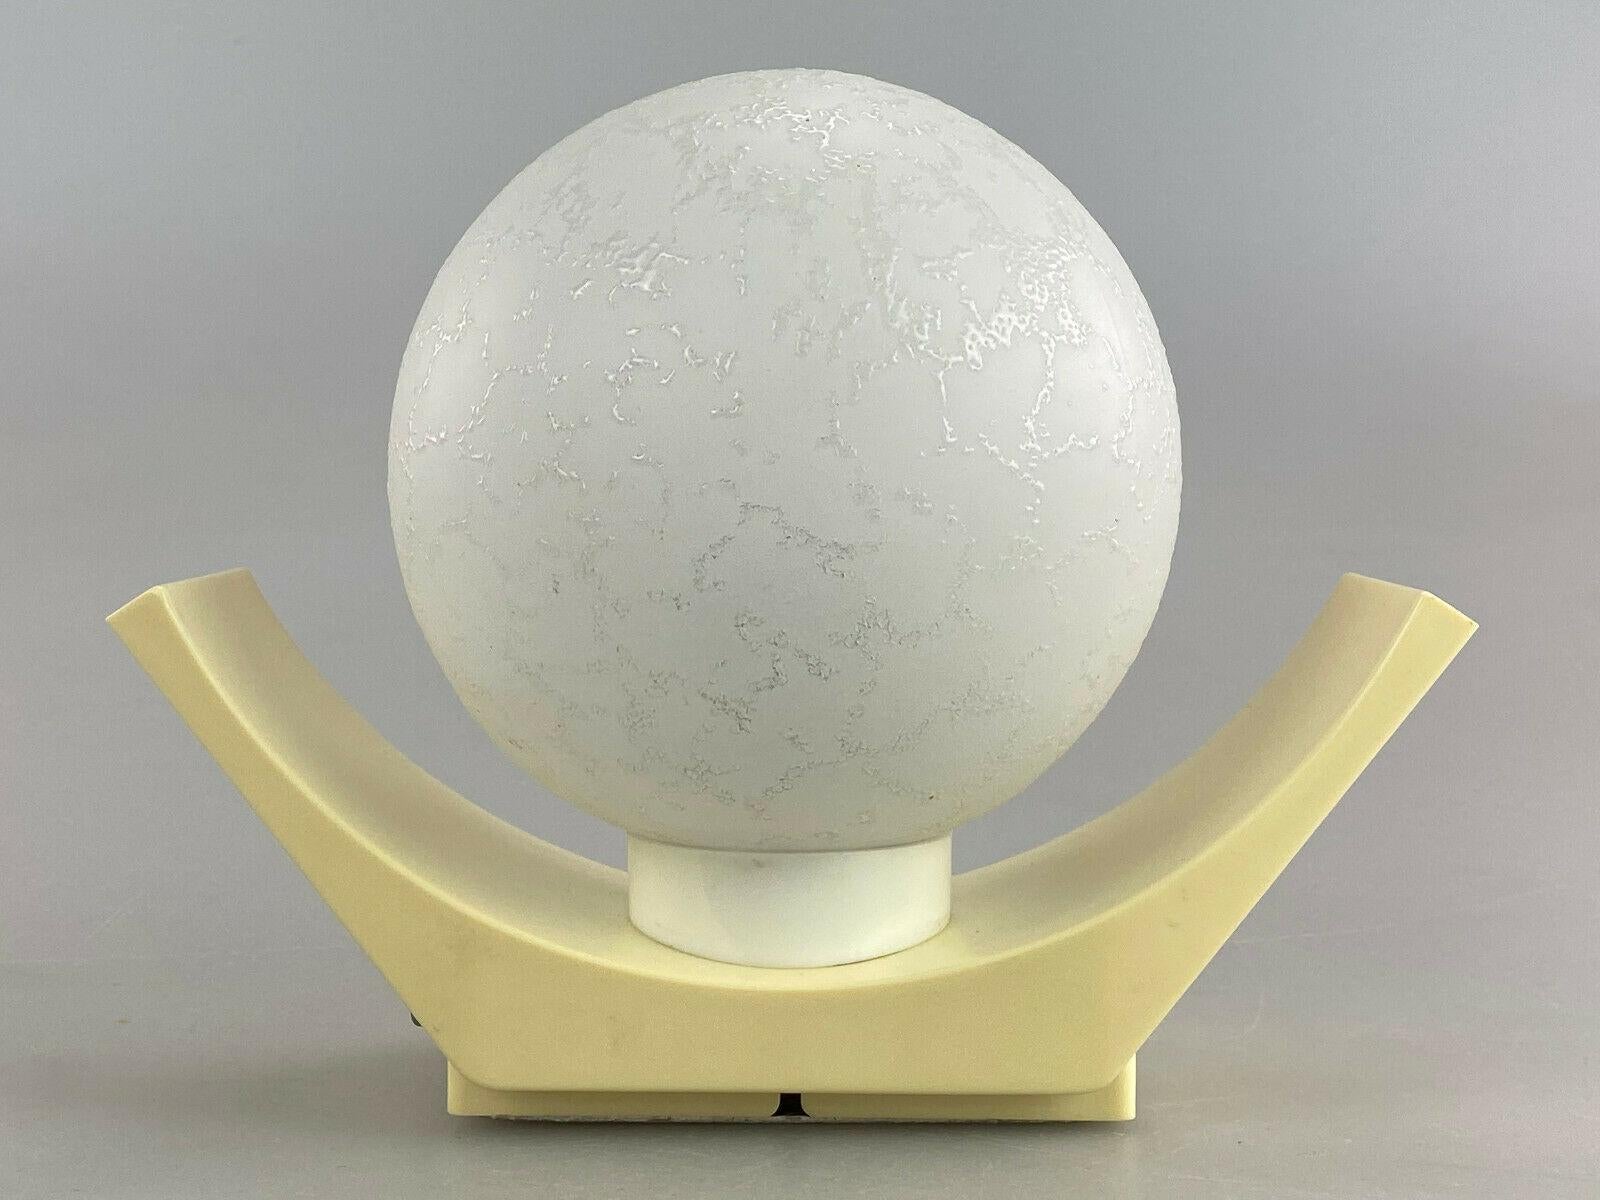 60s 70s Wall Lamp Ball Lamp Lamp Light Space Age Design For Sale 1